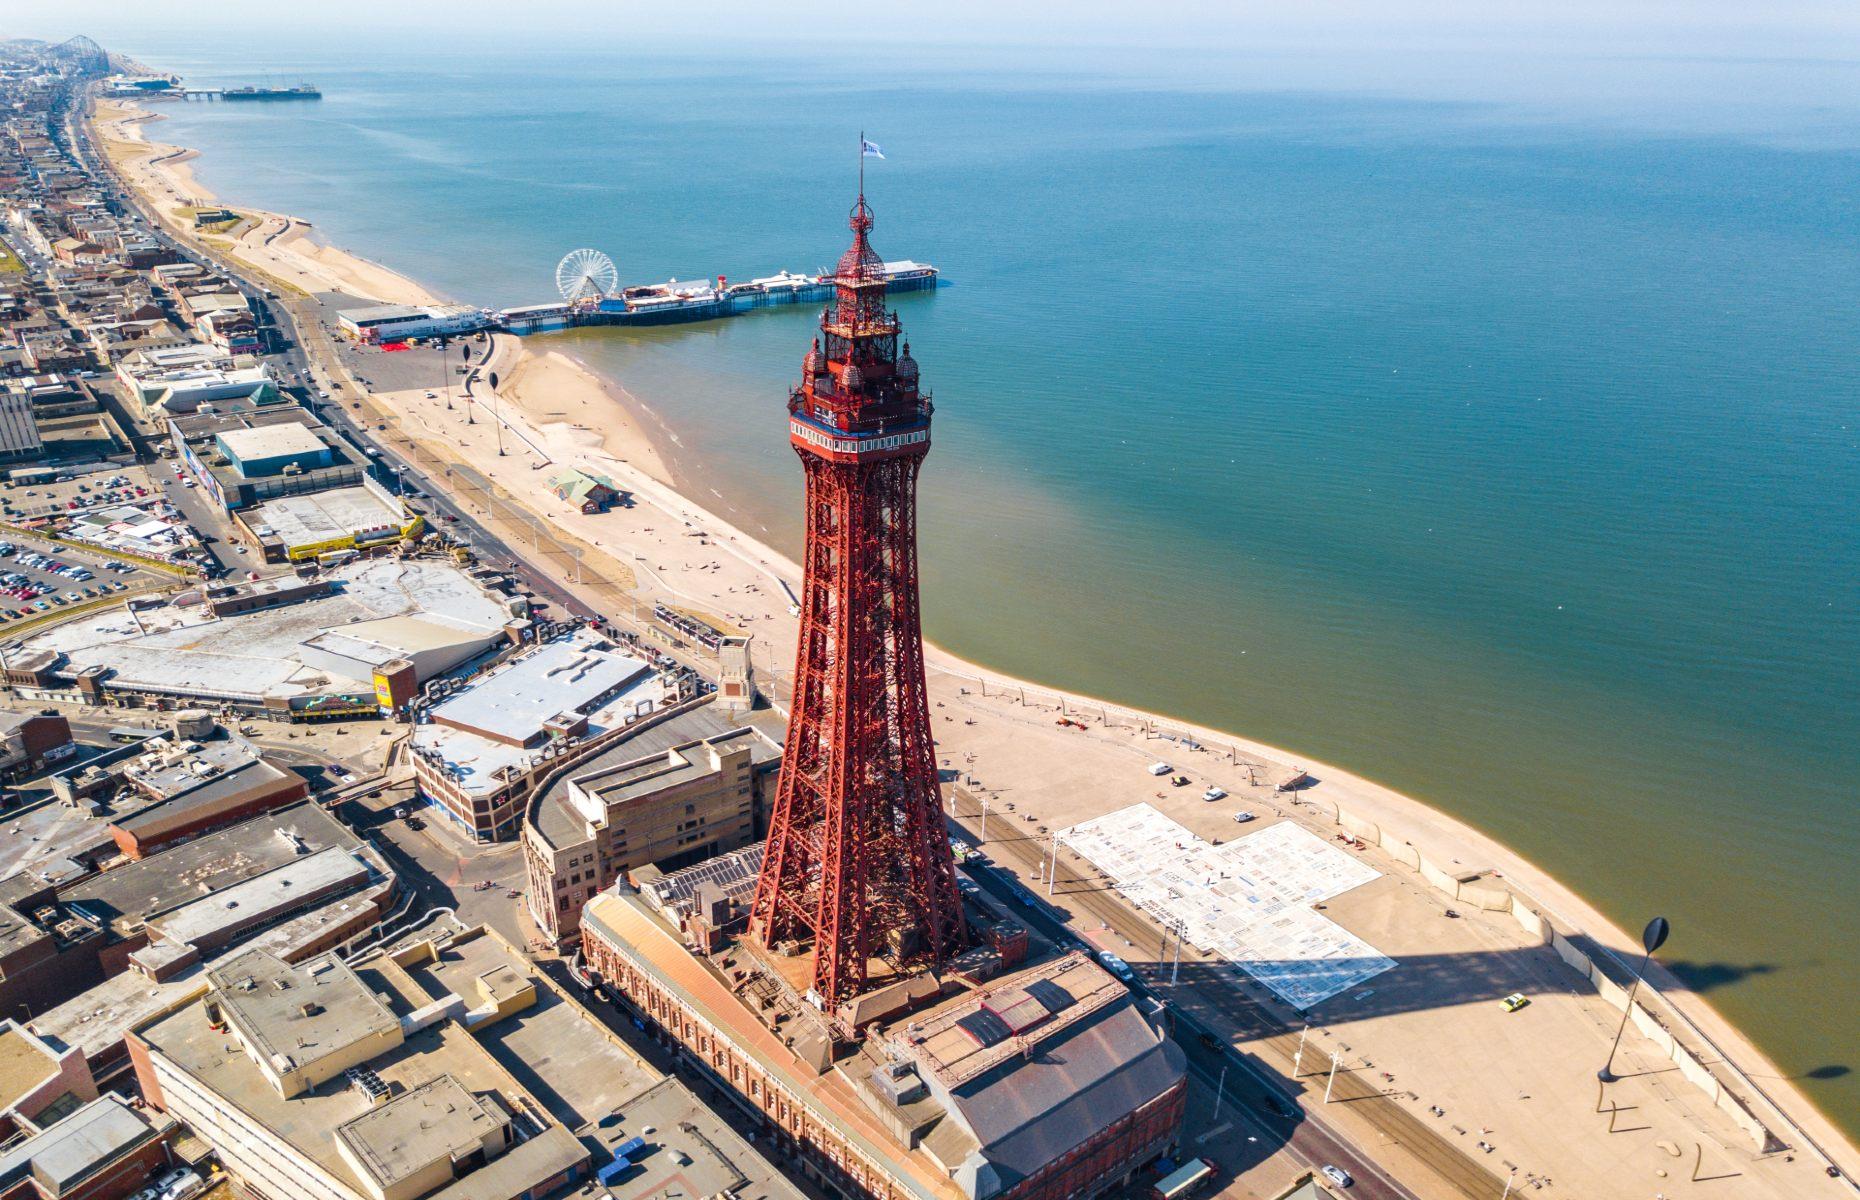 <p>Blackpool’s mighty 518-foot (158m) tower has crowned Lancashire’s much-loved seafront for over 150 years. Inspired by the Eiffel Tower, the structure was designed by Lancashire architects James Maxwell and Charles Tuke and first opened to the public in 1894. The landmark is best known for its breathtaking Tower Ballroom, designed by Frank Matcham, which is famed for its elegant architecture and sprung dance floor. Soaring over Blackpool's Golden Mile, the tower provides sweeping panoramas across the coastline.</p>